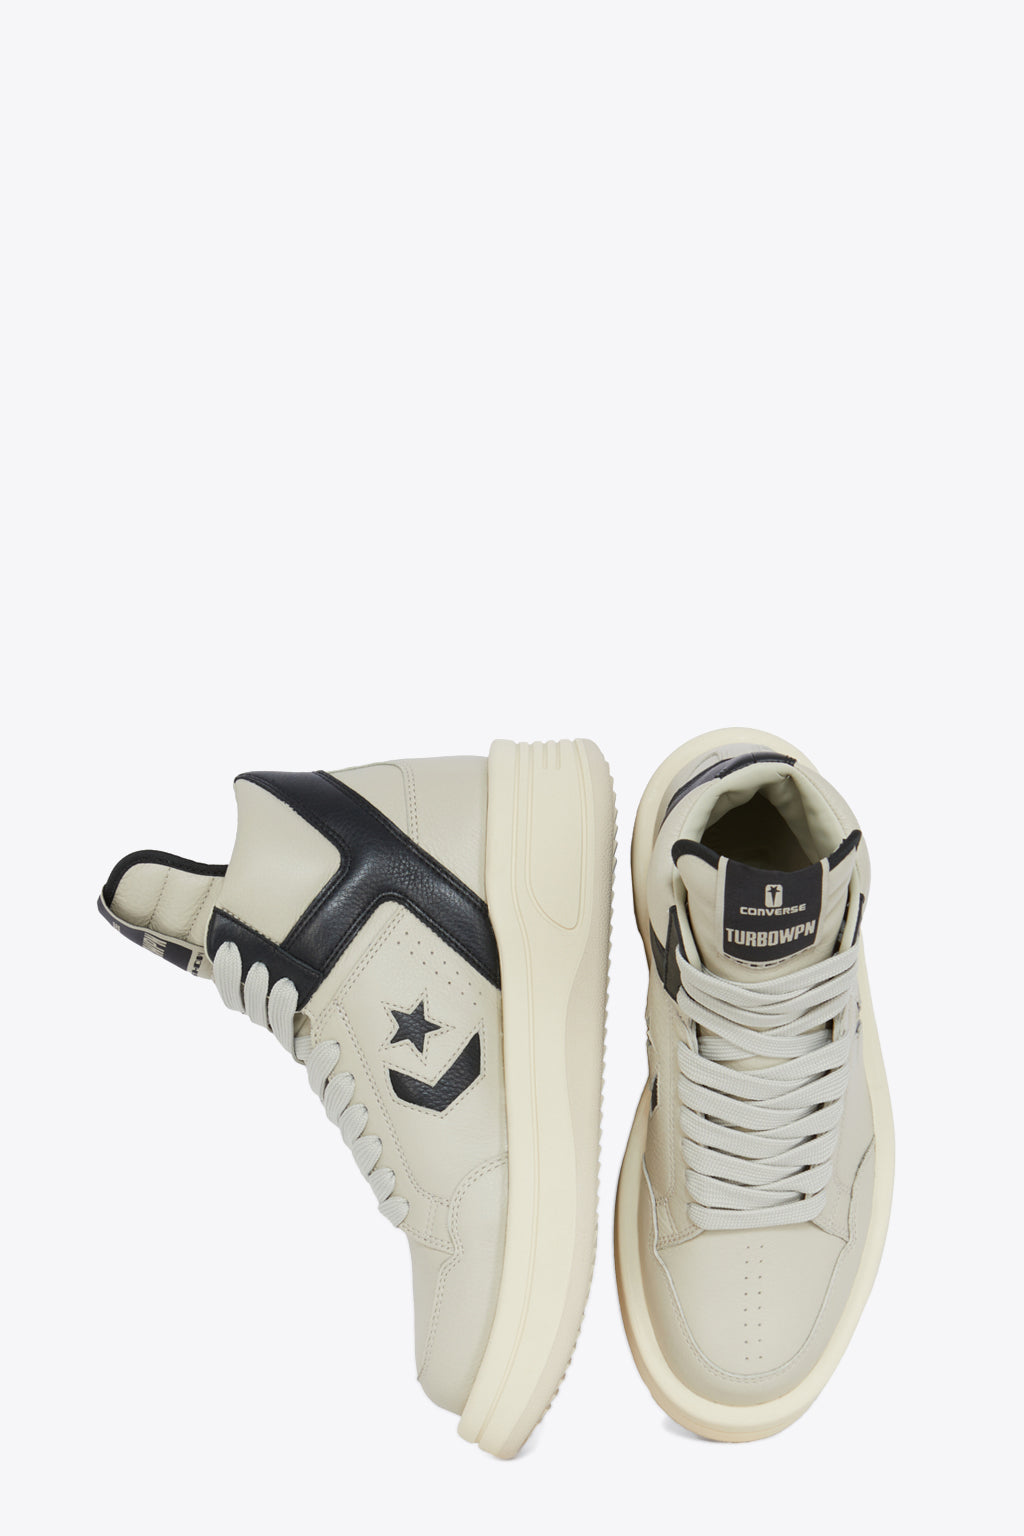 alt-image__Off-white-leather-basket-sneaker-Converse-collab---Turbowpn-